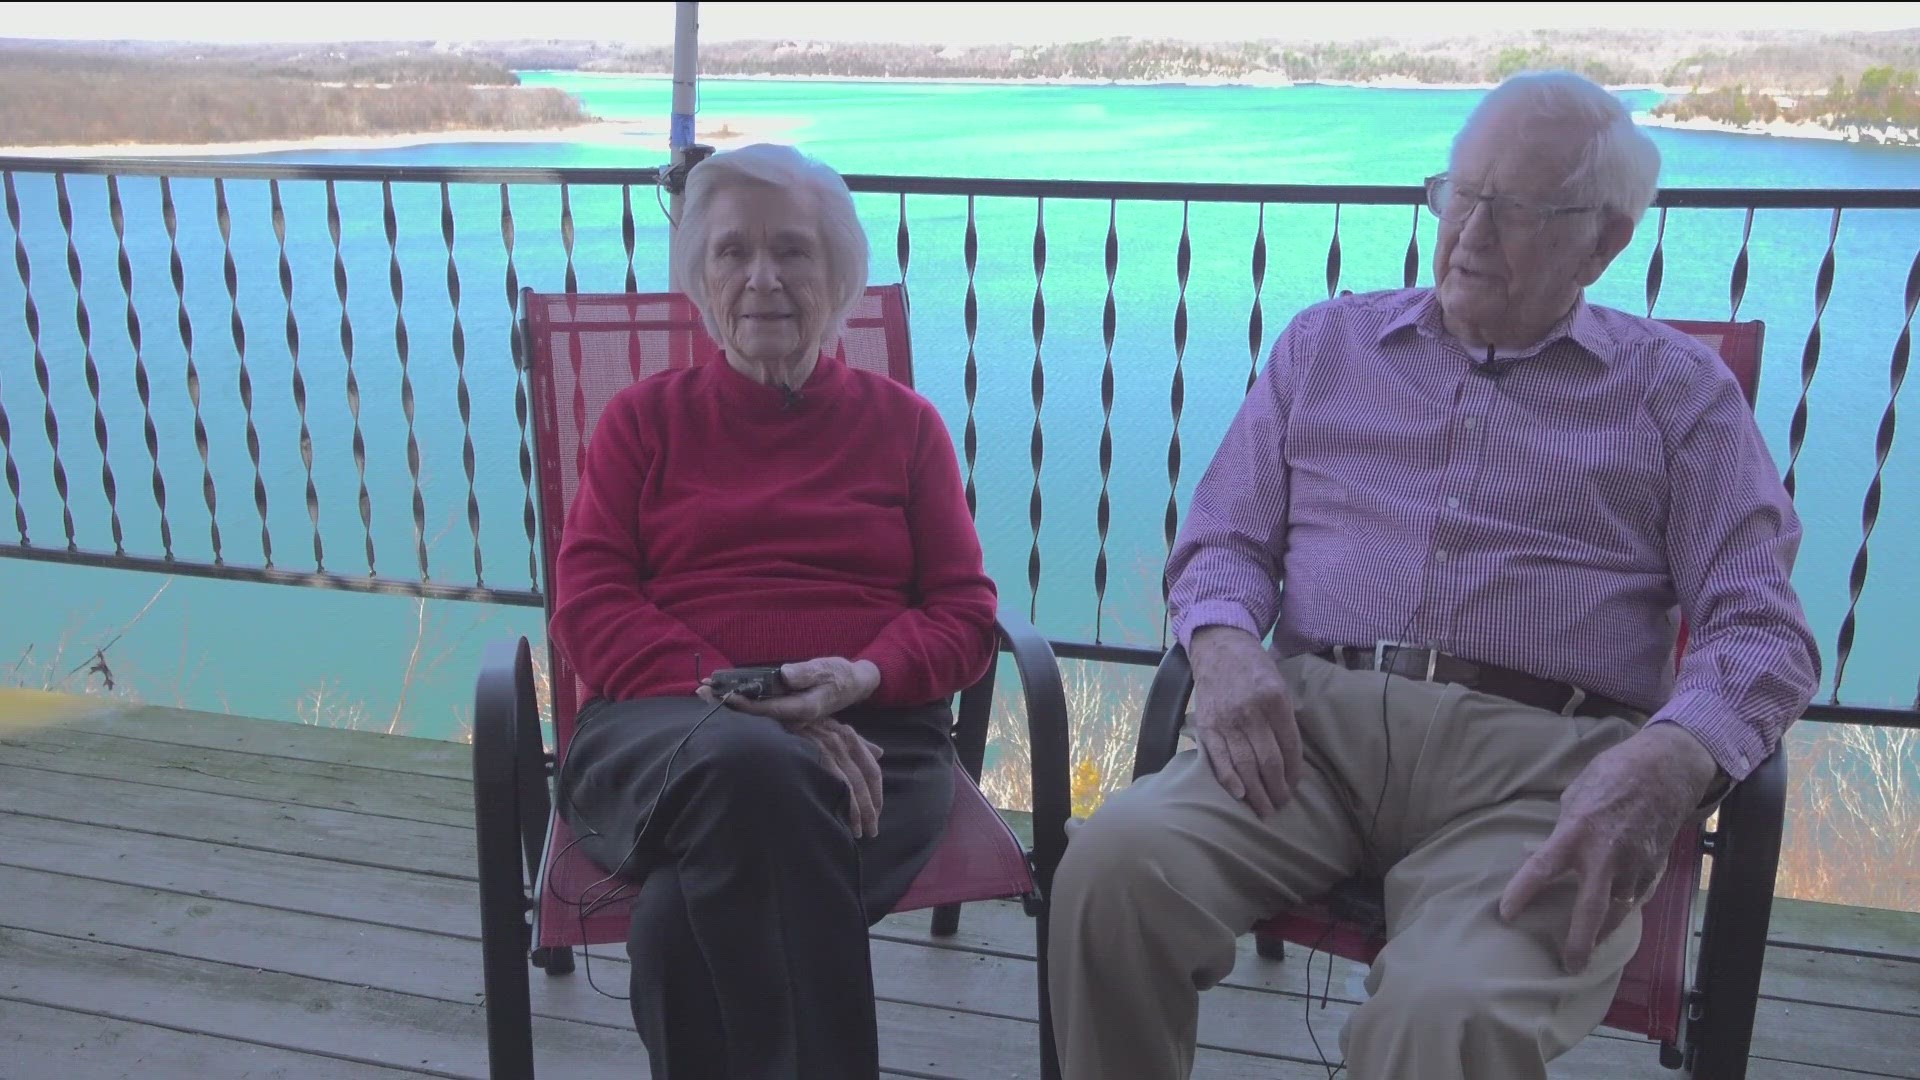 FOR ONE ROGERS COUPLE - THEIR VALENTINES DAY CARDS HAVE HAD THE SAME NAMES ON THEM FOR MORE THAN 76 YEARS...